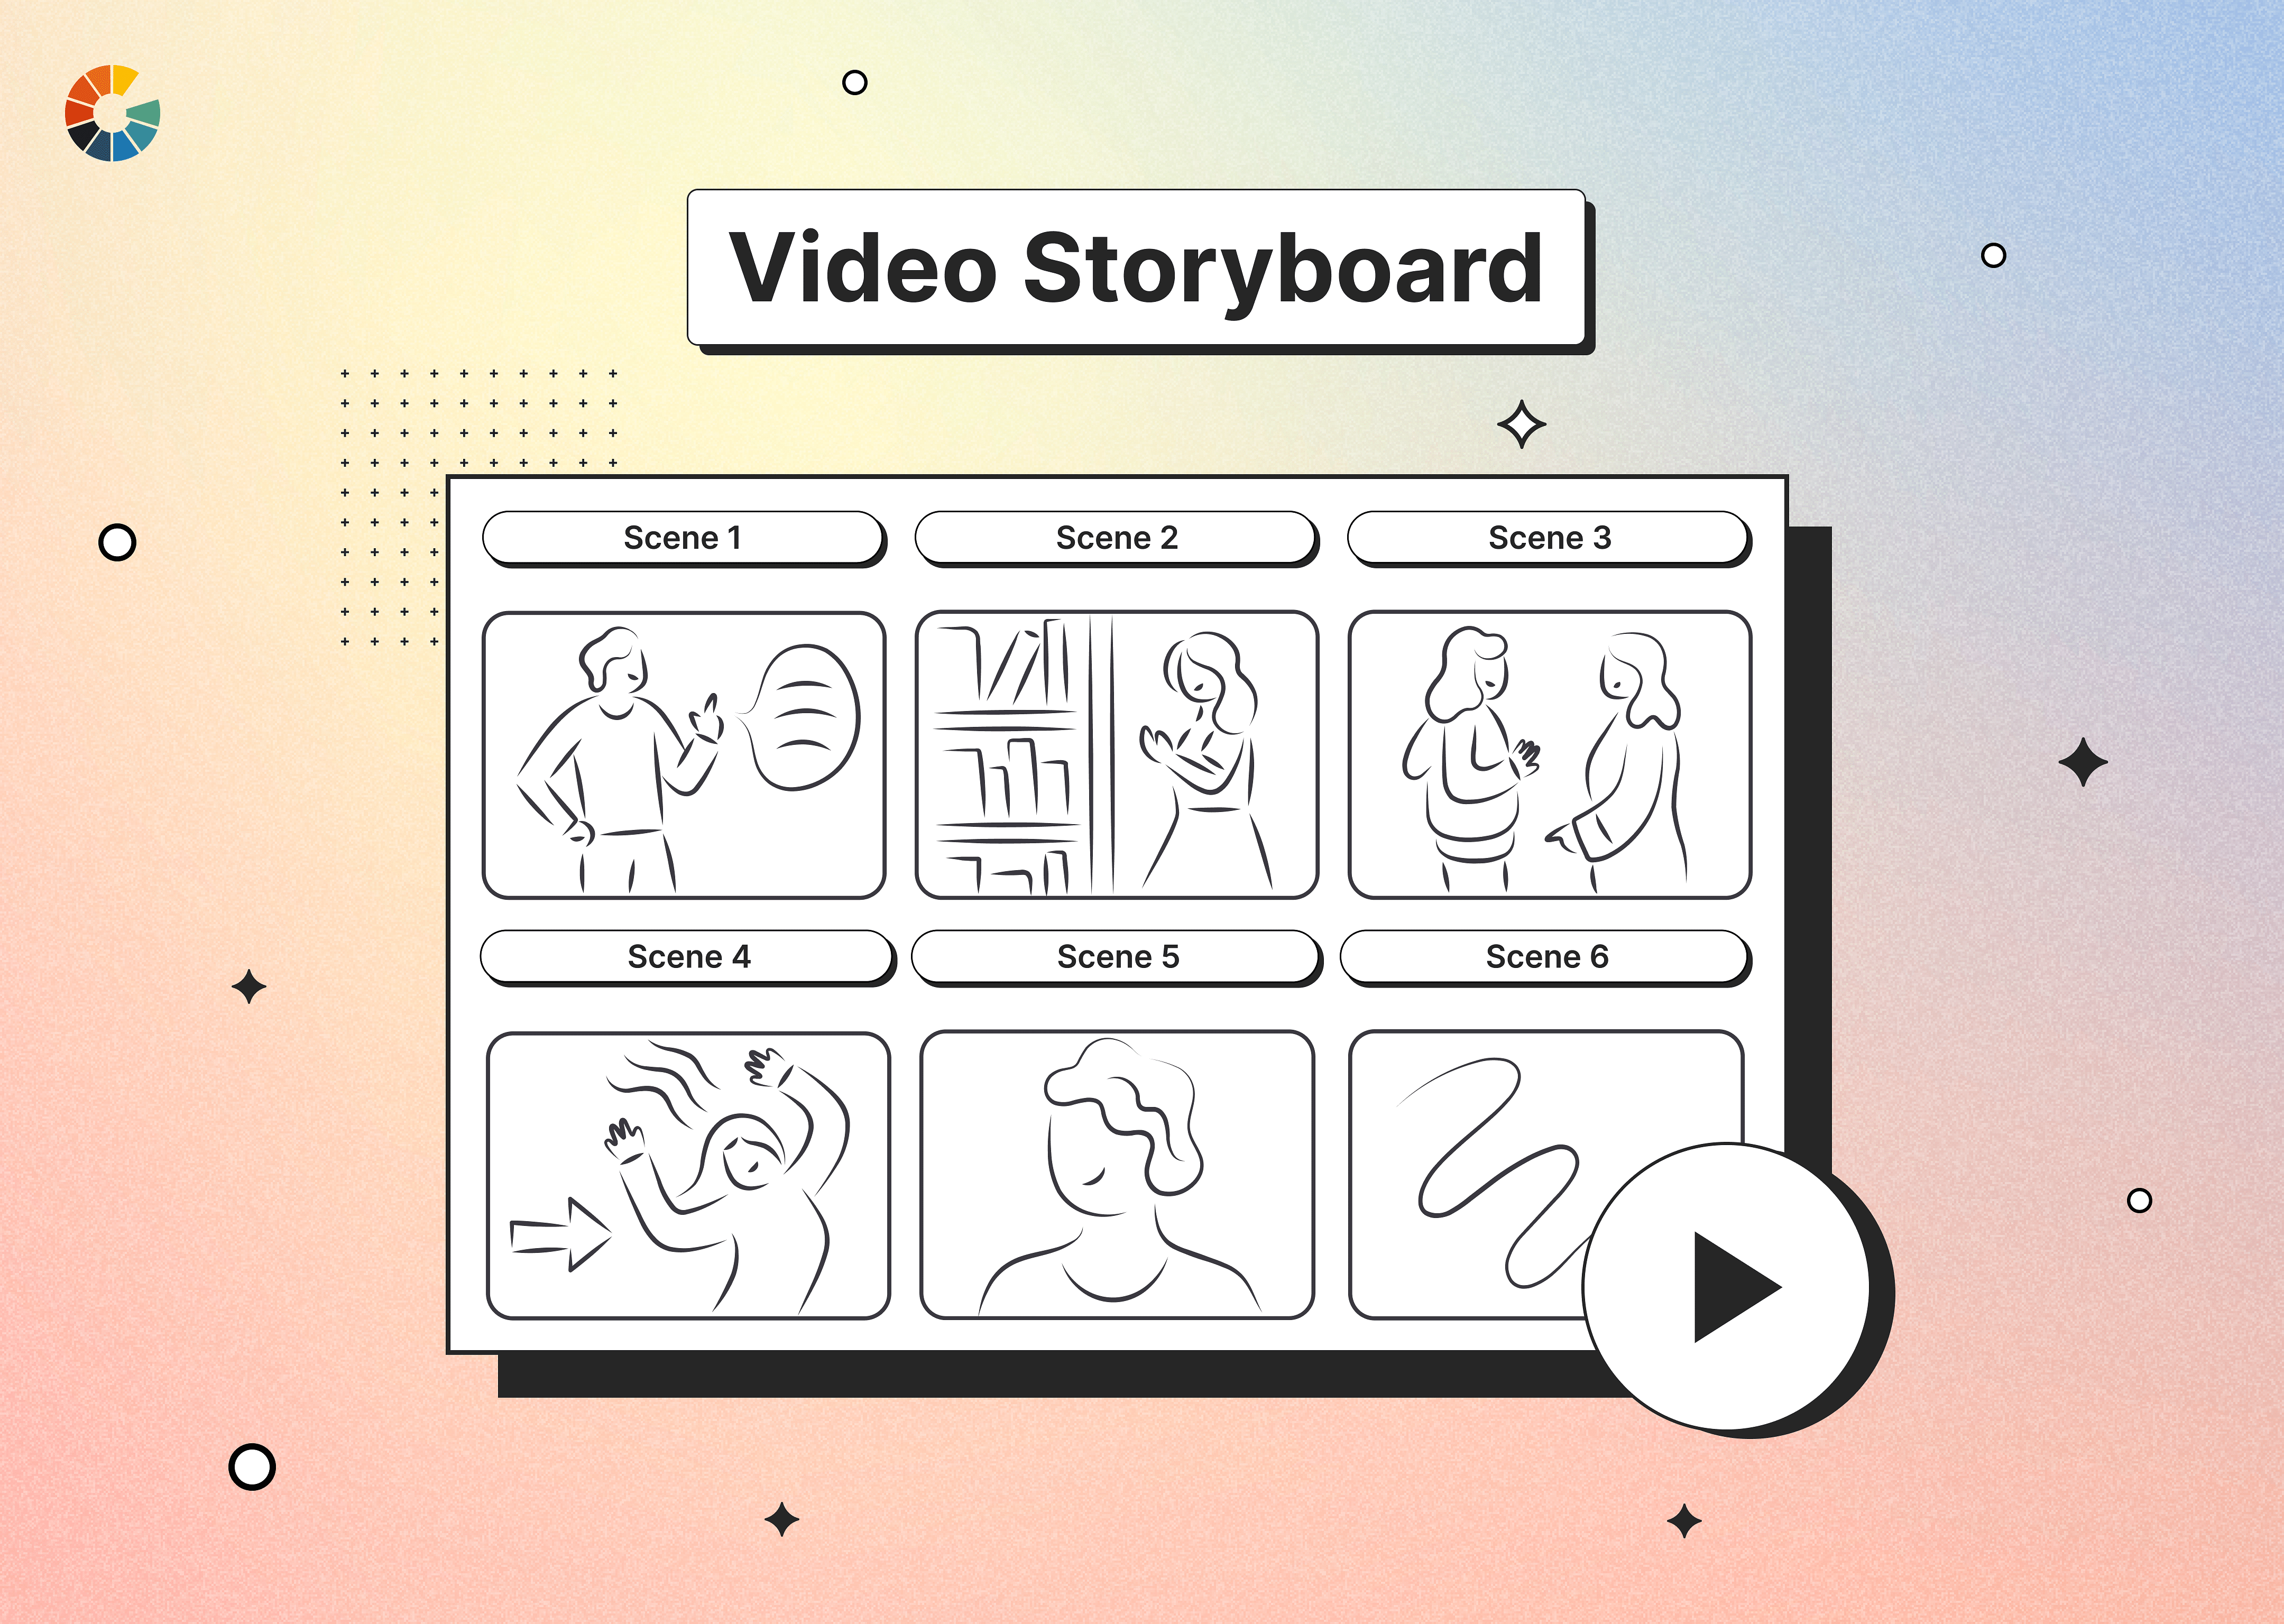 Video Storyboard: How to create a storyboard for a video?